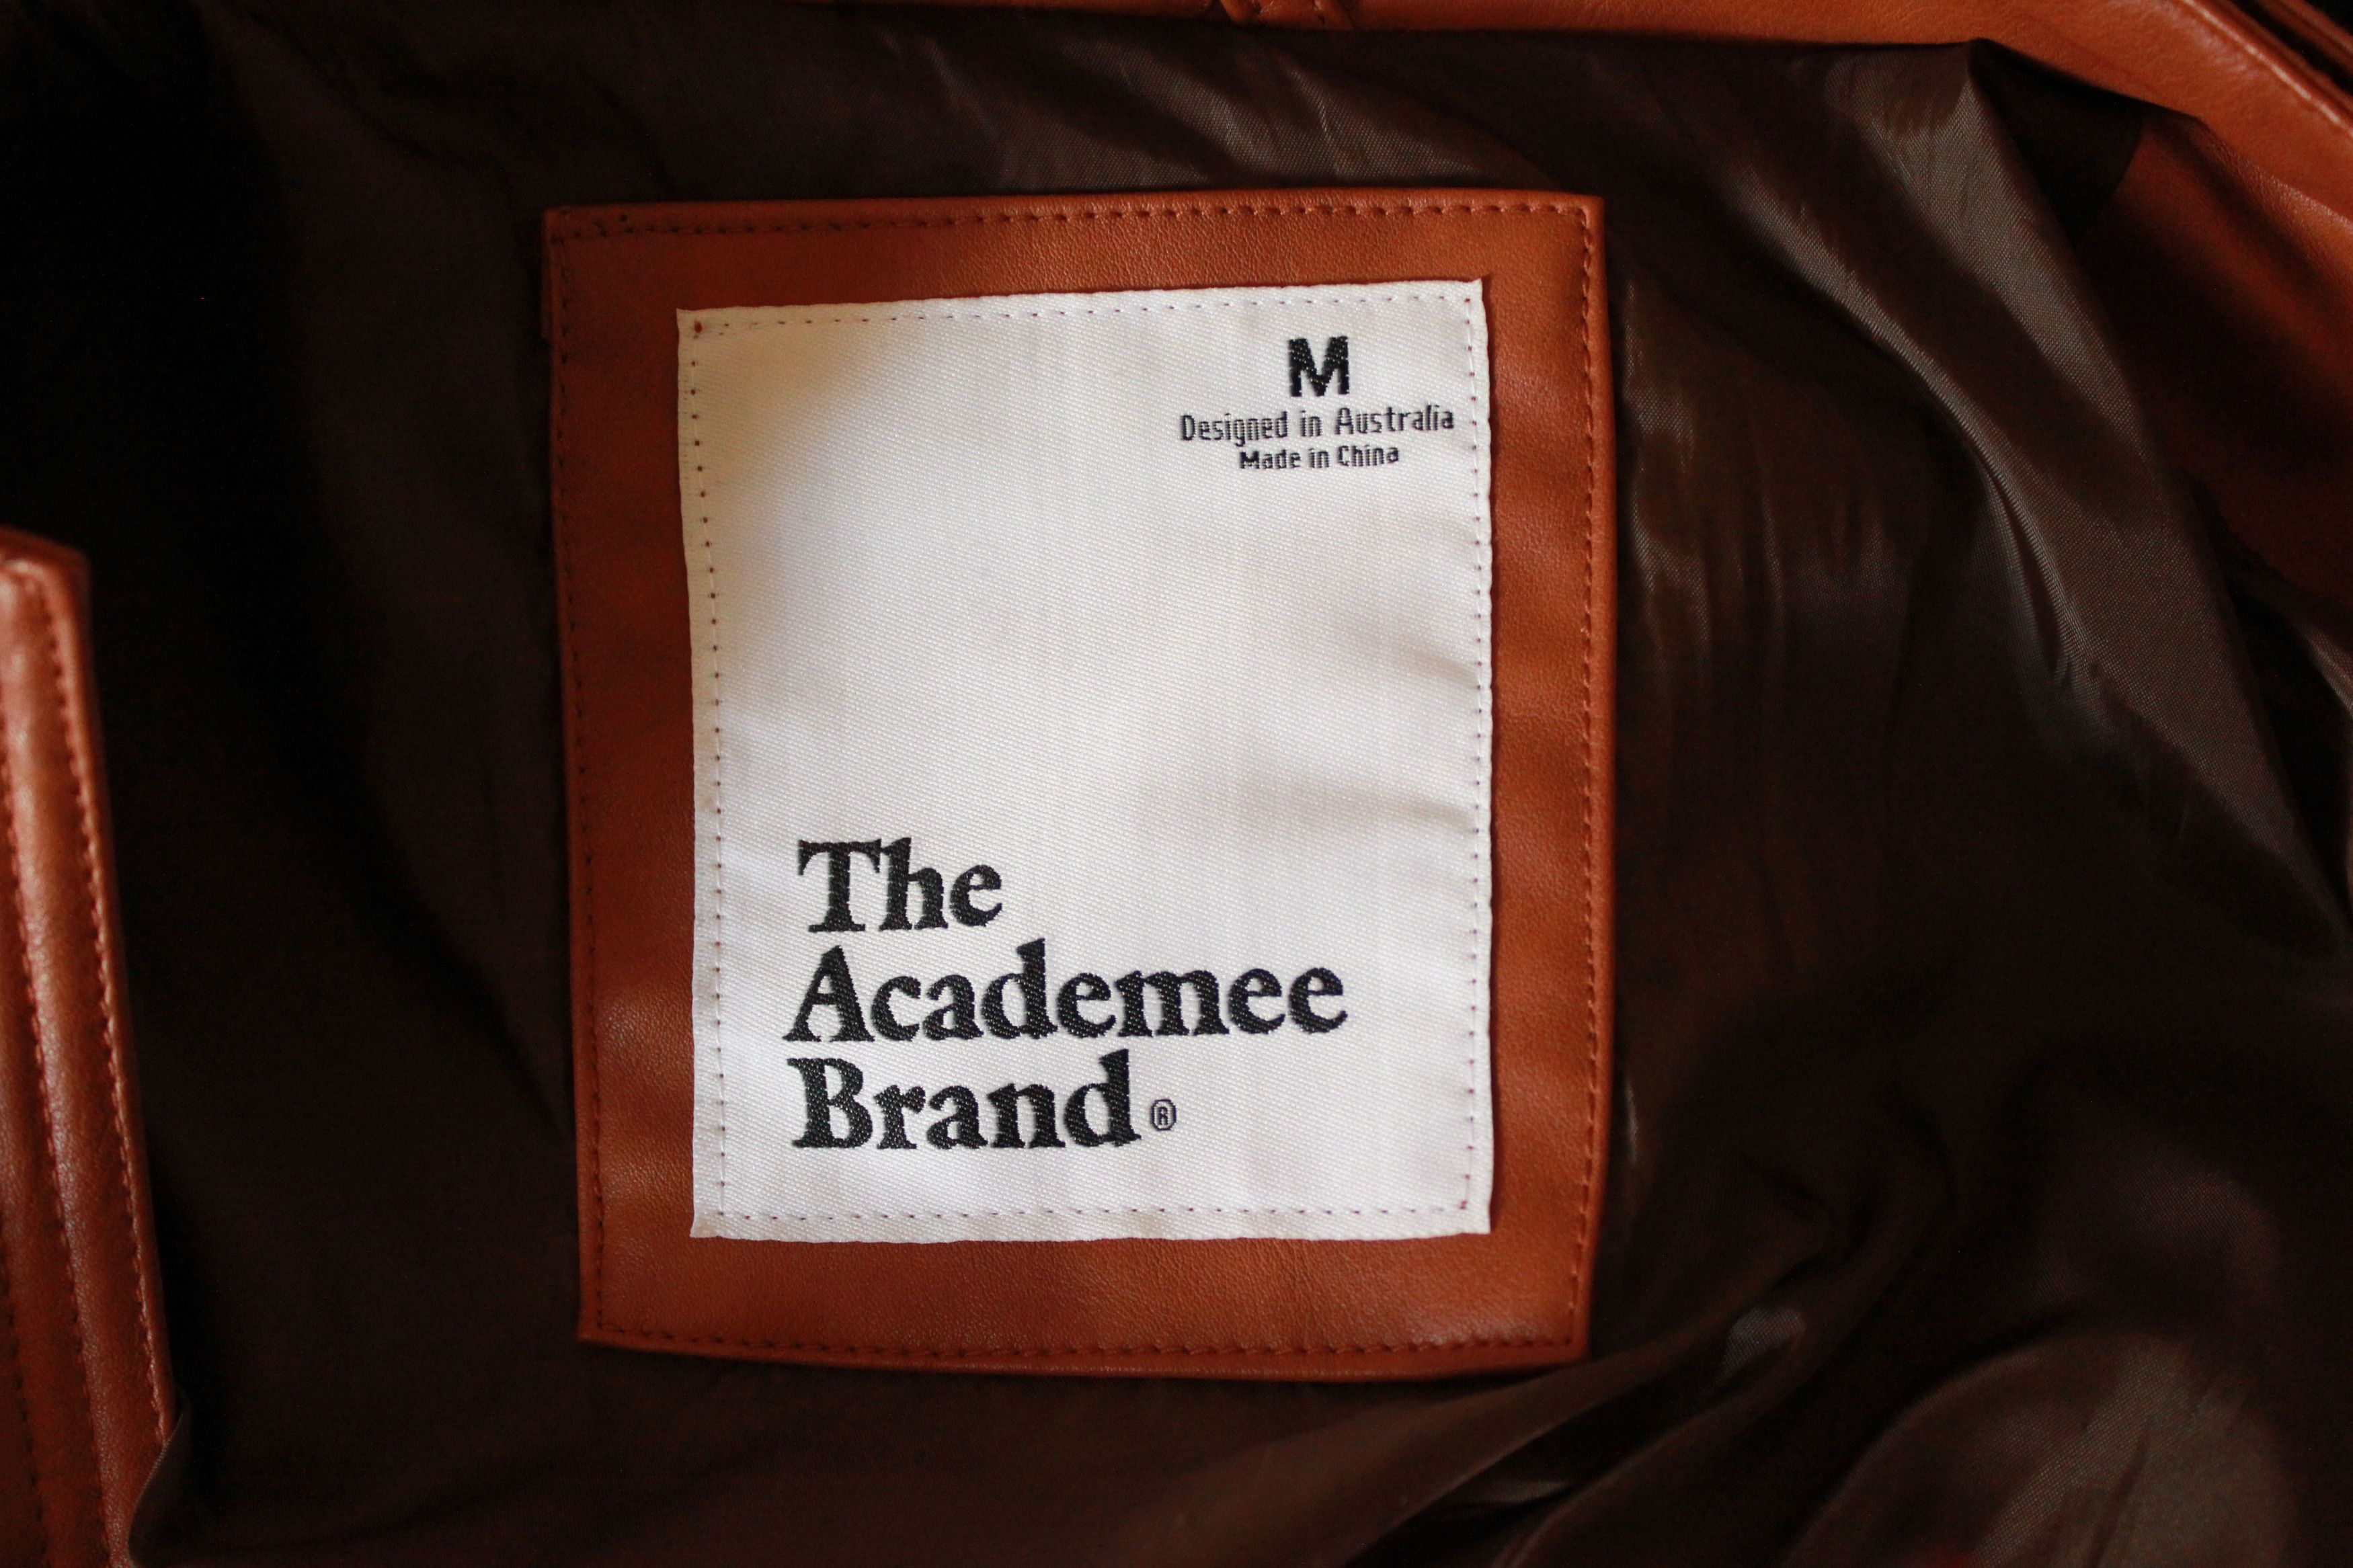 The Academee Brand Caramel Leather-Look Jacket Size US M / EU 48-50 / 2 - 9 Preview